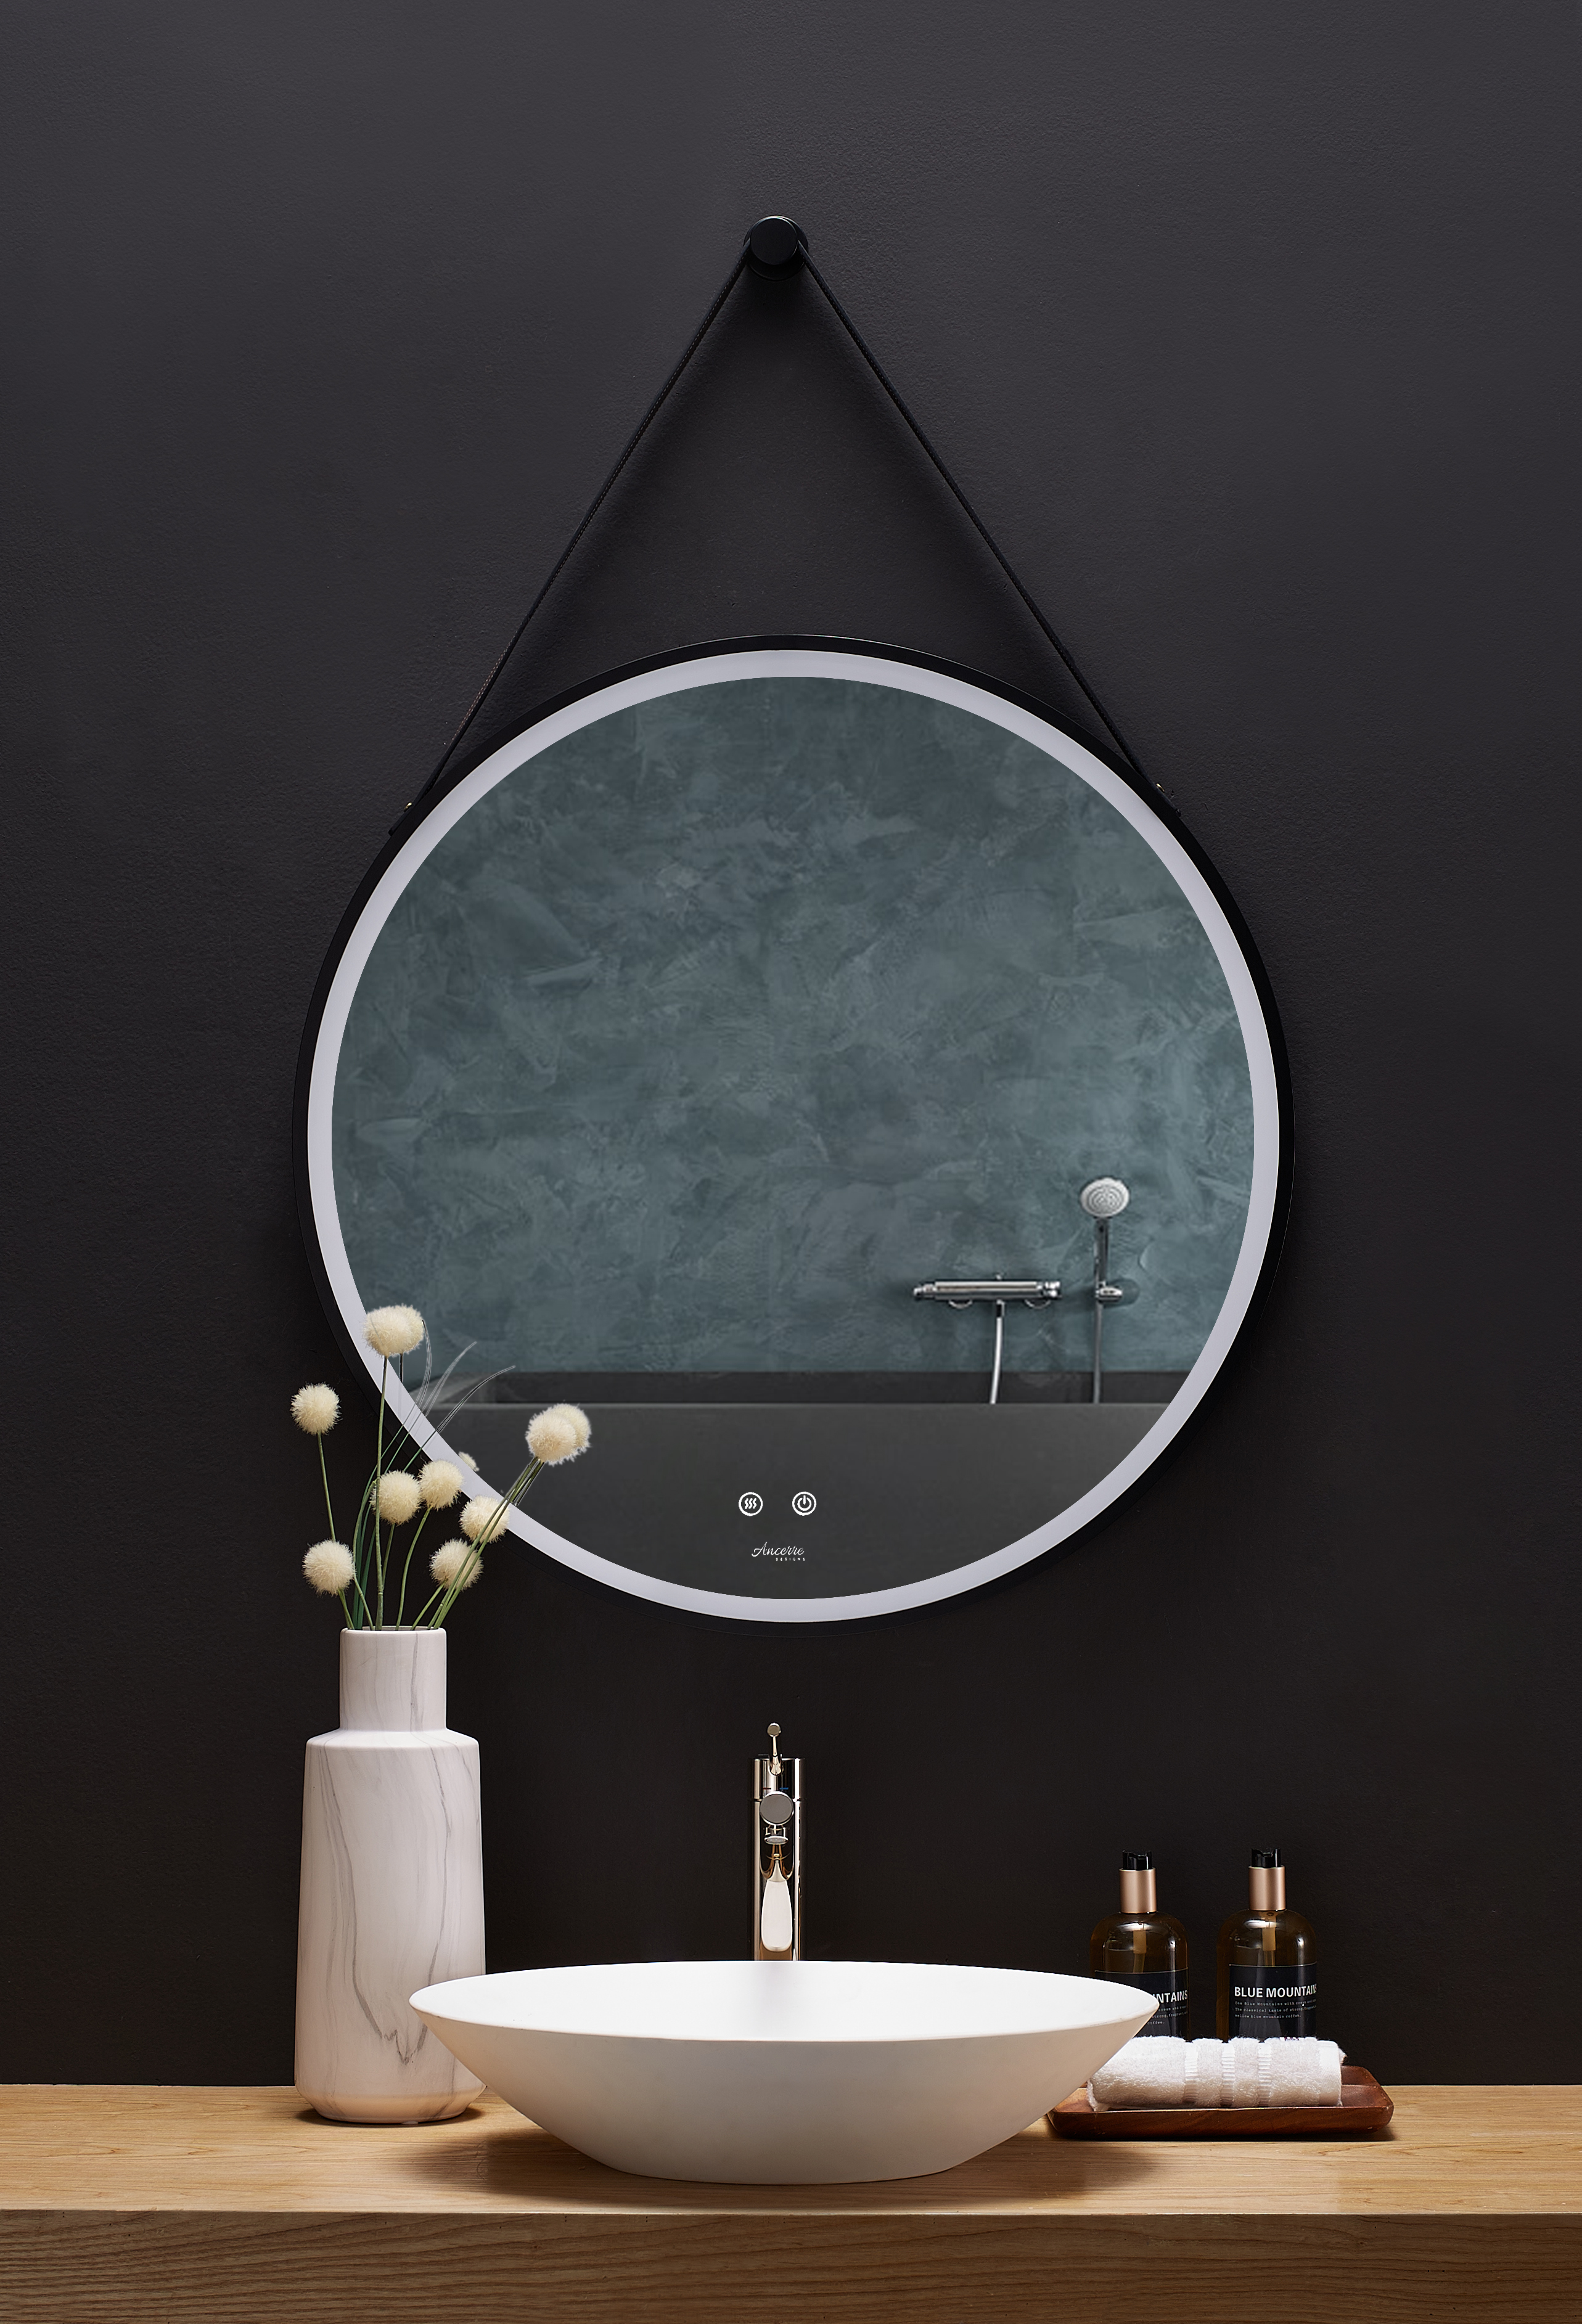 30 in. Round LED Black Framed Mirror with Defogger and Vegan Leather Strap